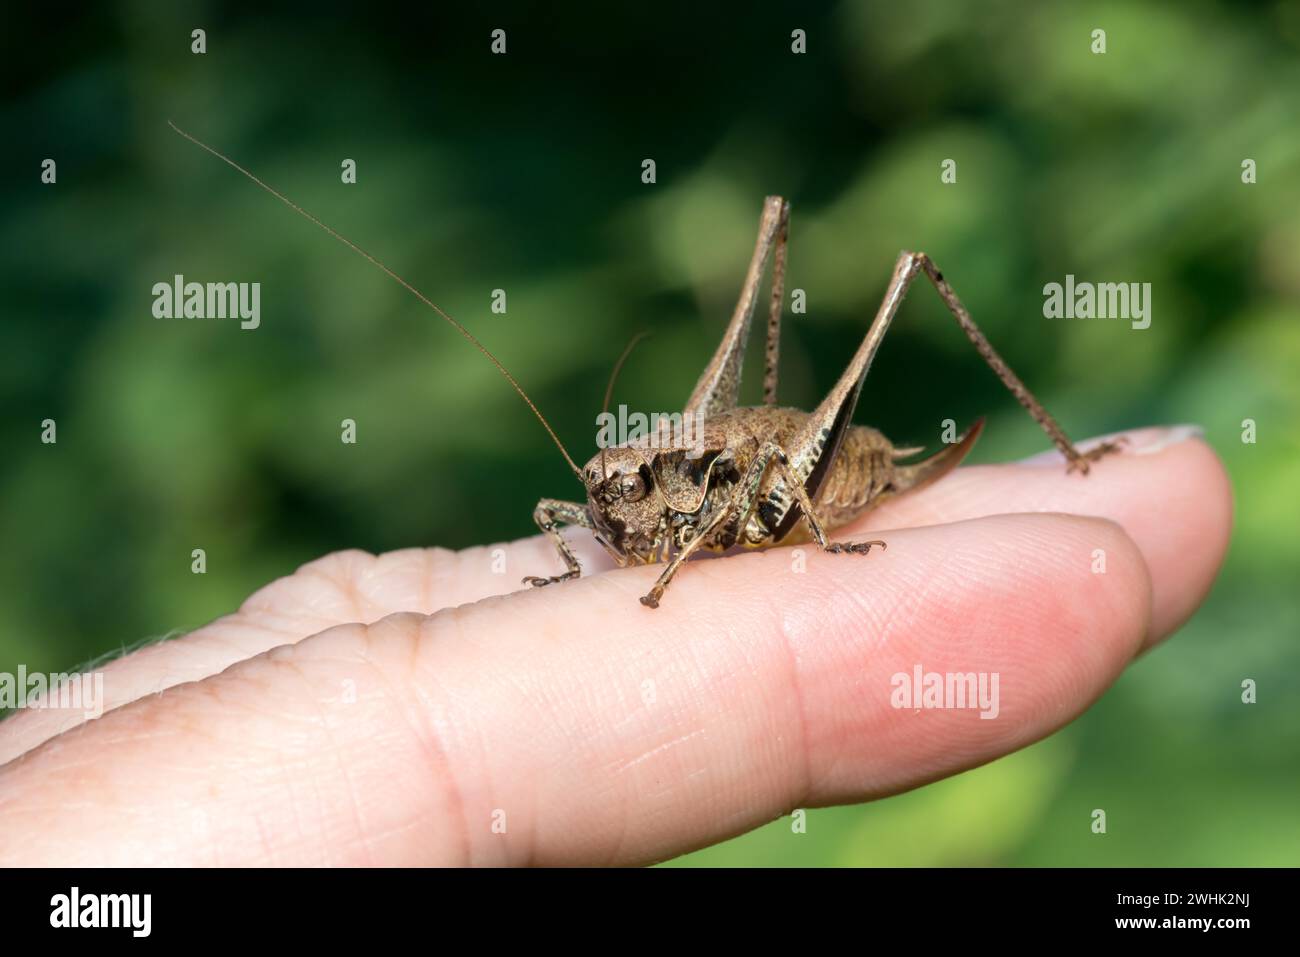 Dark bush-cricket (Pholidoptera griseoaptera) or common bush cricket, female, sitting on the fingers of a human hand and nibbling at the skin, macro Stock Photo